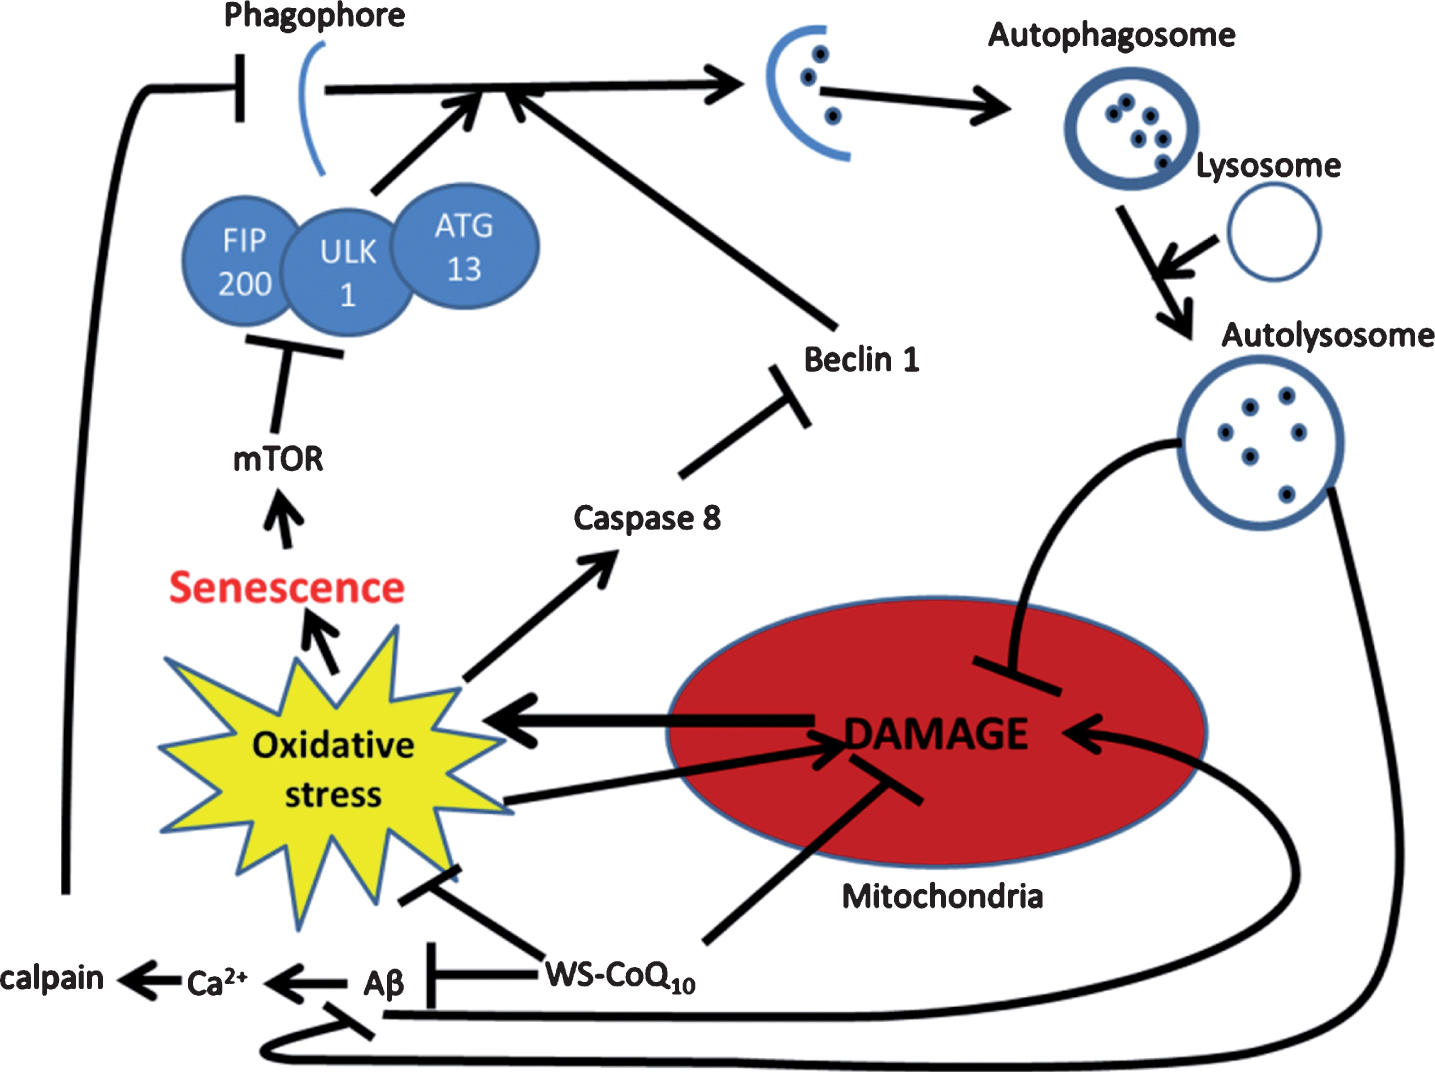 Possible mechanism for autophagic reintroduction by WS-CoQ10 in PS-1 mutated fibroblasts. mTOR is related to the maintenance of cellular senescence as well as the inhibition of autophagy through the induction hyper-phosphorylation of ATG13. Beclin-1 a known inducer of autophagy is degraded by caspase 8 which is activated during times of oxidative stress produced in huge quantities by the damaged mitochondria of PS-1 mutated fibroblasts. Aβ has been seen to lead to mitochondrial damage and can increase the influx of Ca2+ which can activate the antiapoptotic protein calpain. WS-CoQ10 is able to considerably lessen mitochondrial damage and the levels of ROS that lead to oxidative stress. Its possible the reduction of oxidative stress may lead to reduced degradation of beclin-1 via caspase 8 leading to increased autophagy. This may act as a positive feedback loop as the reintroduction of autophagy would allow the degradation of dysfunctional mitochondria and oxidized proteins.